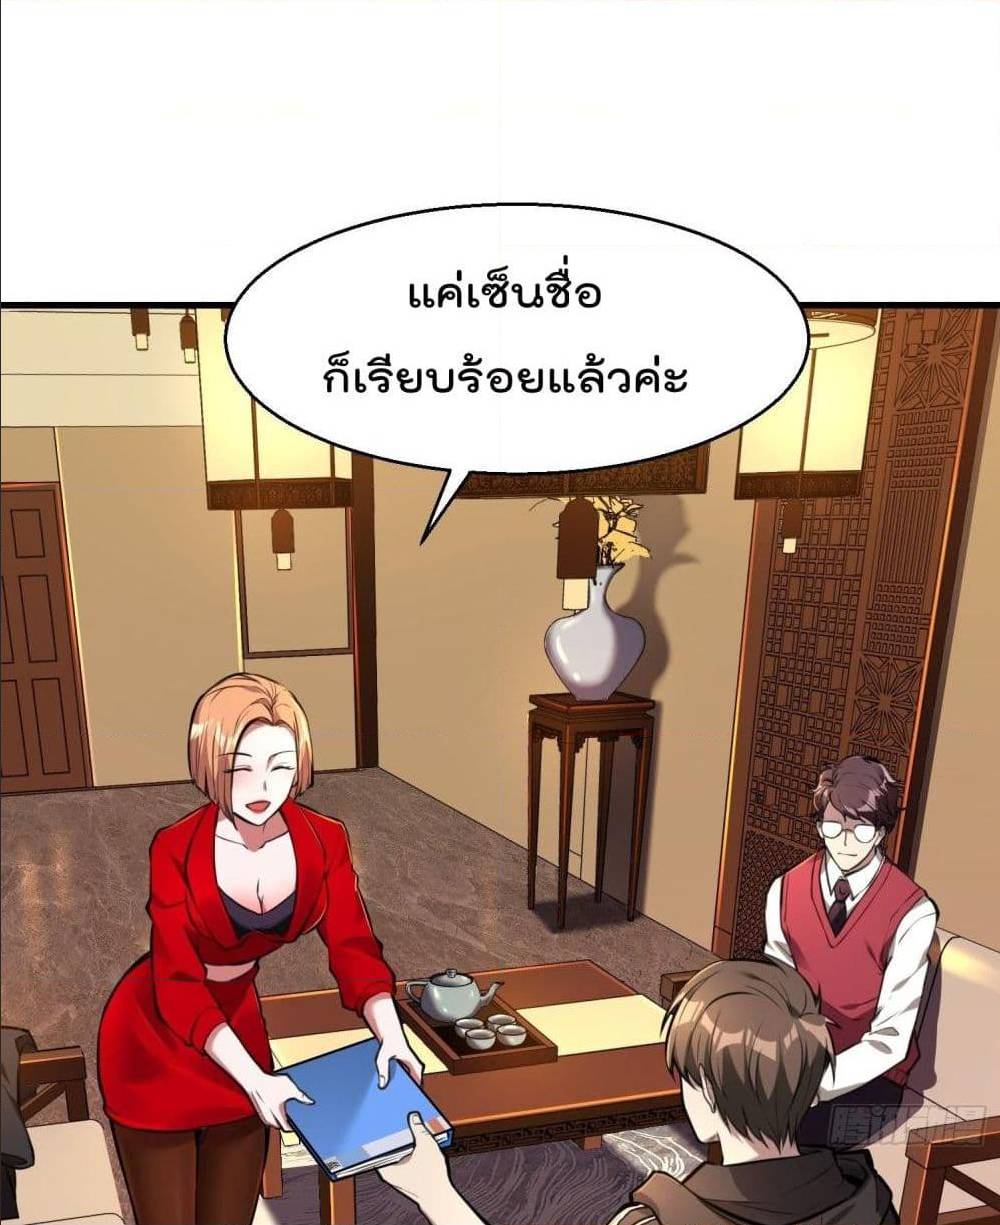 Immortal Husband in The City 17 (97)